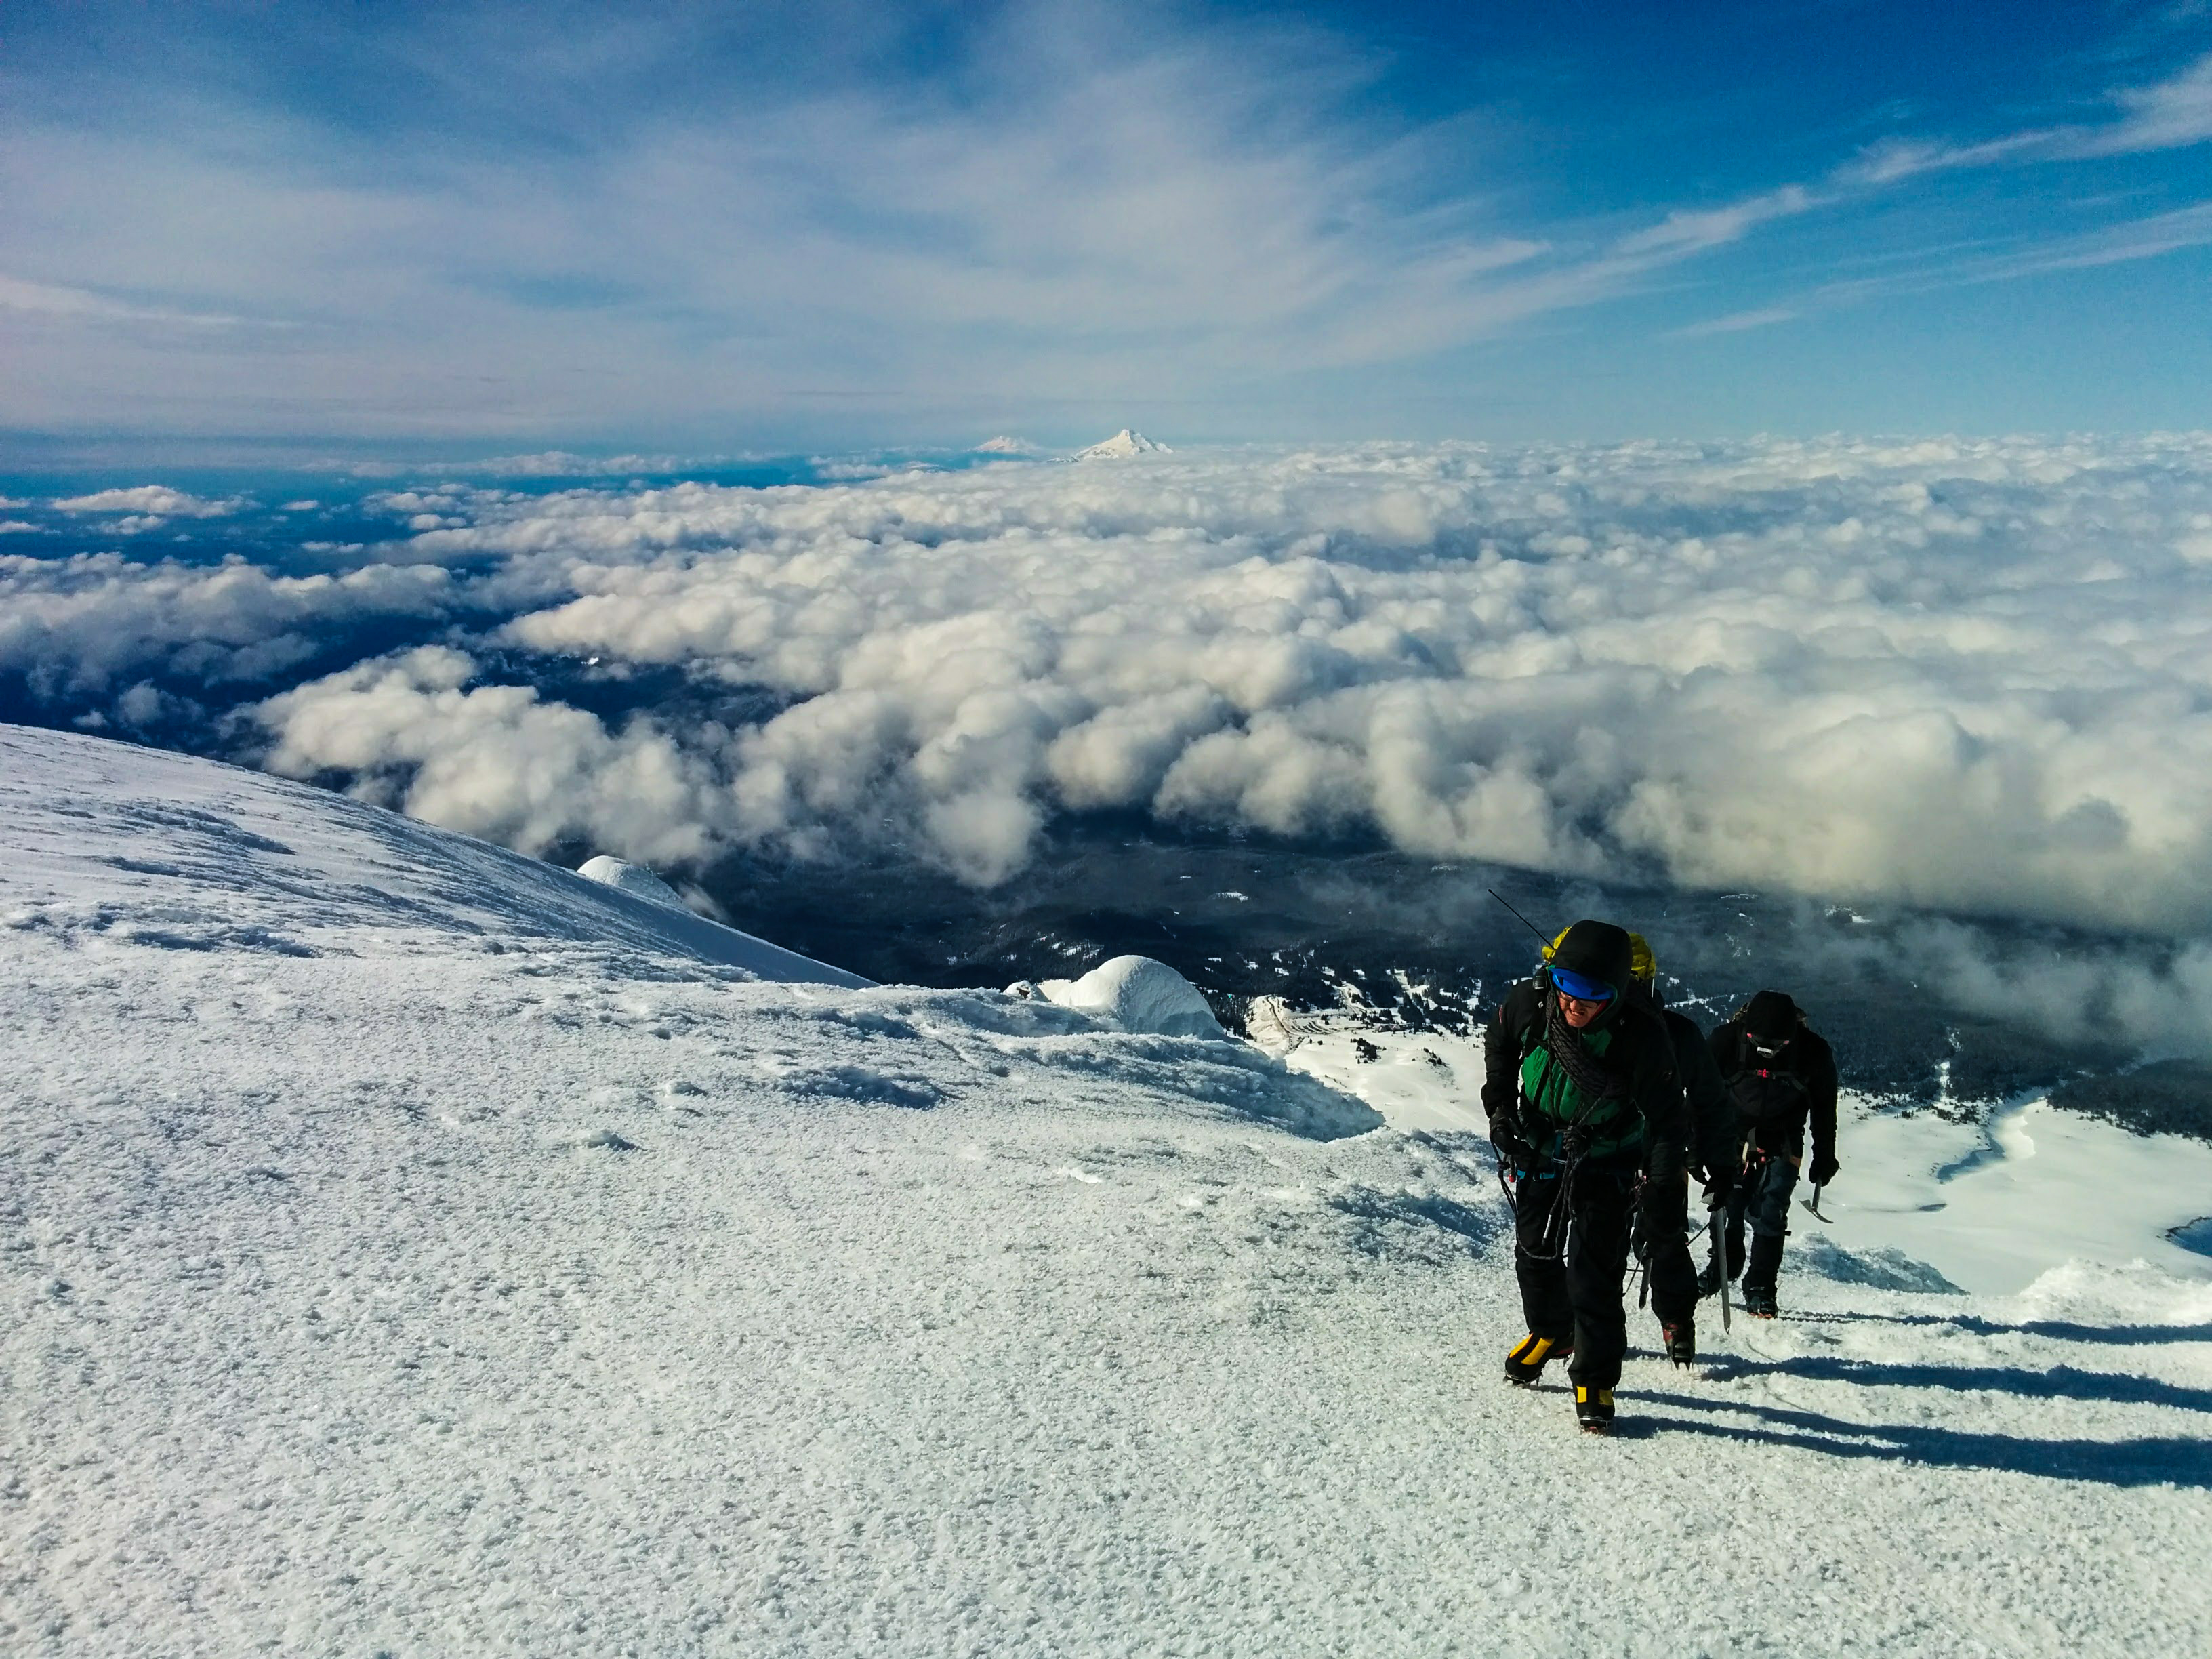 Approaching the Summit of Mt Hood, Oregon